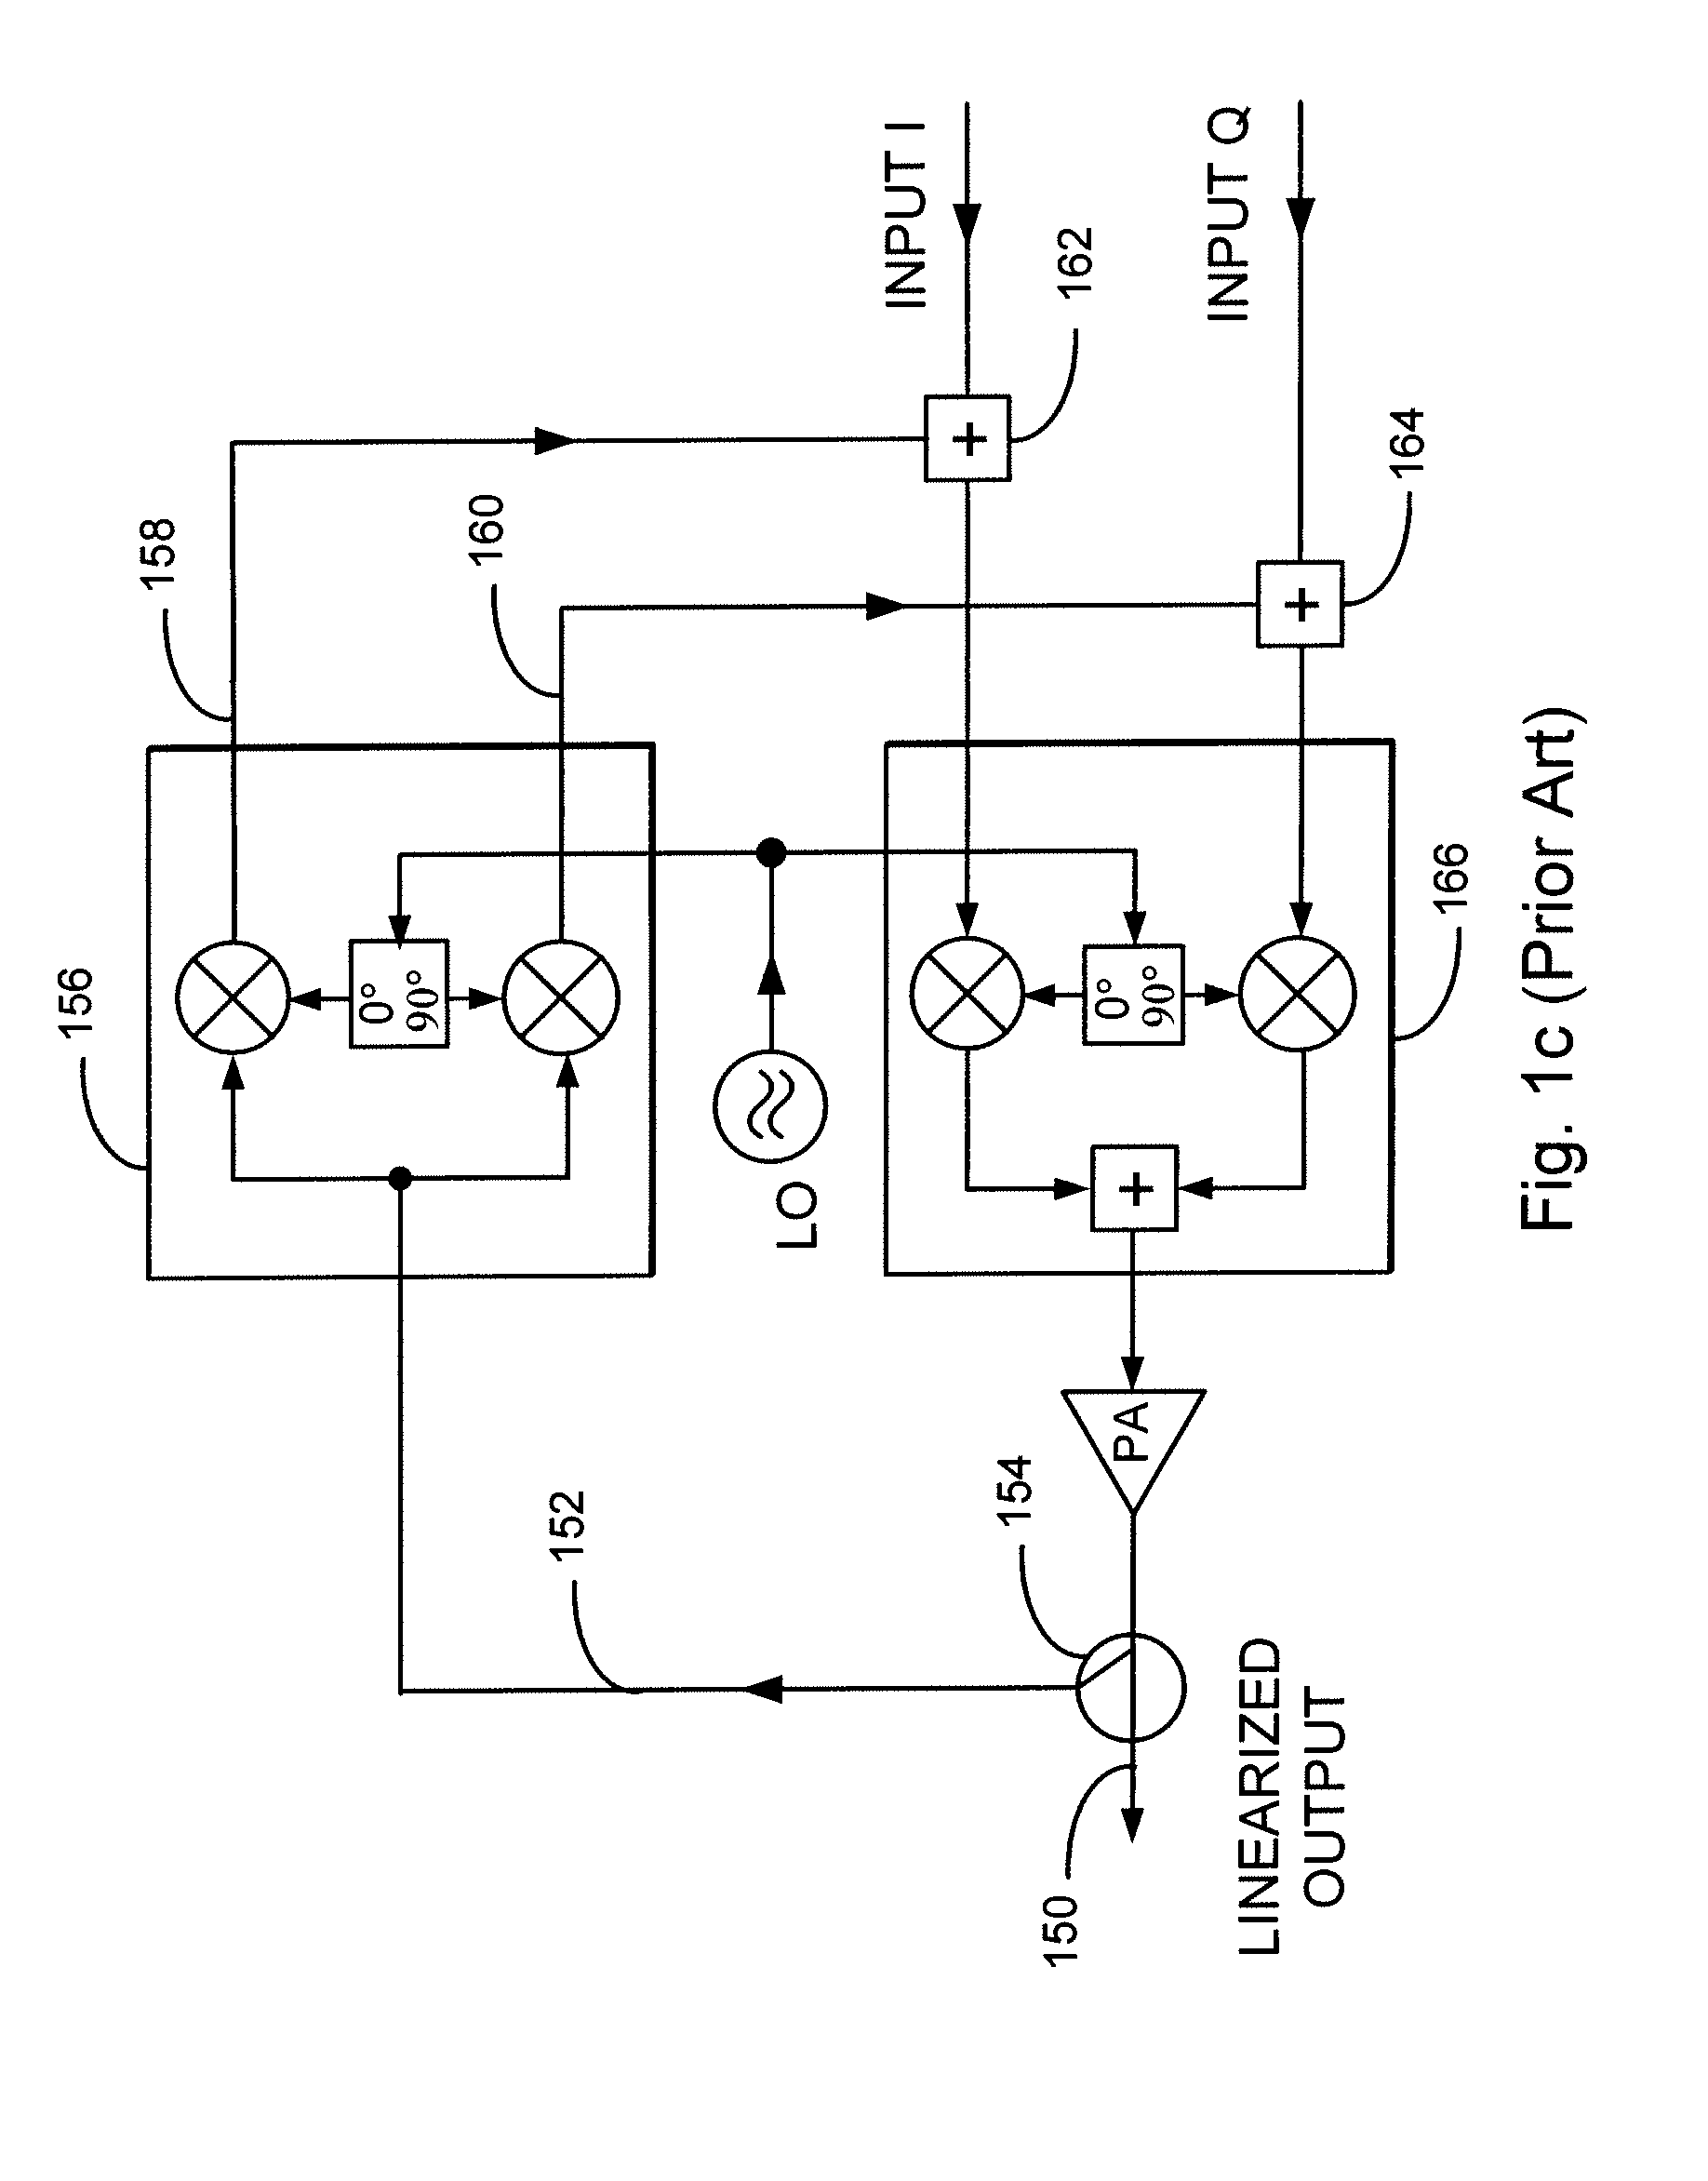 System and method for active diplexers